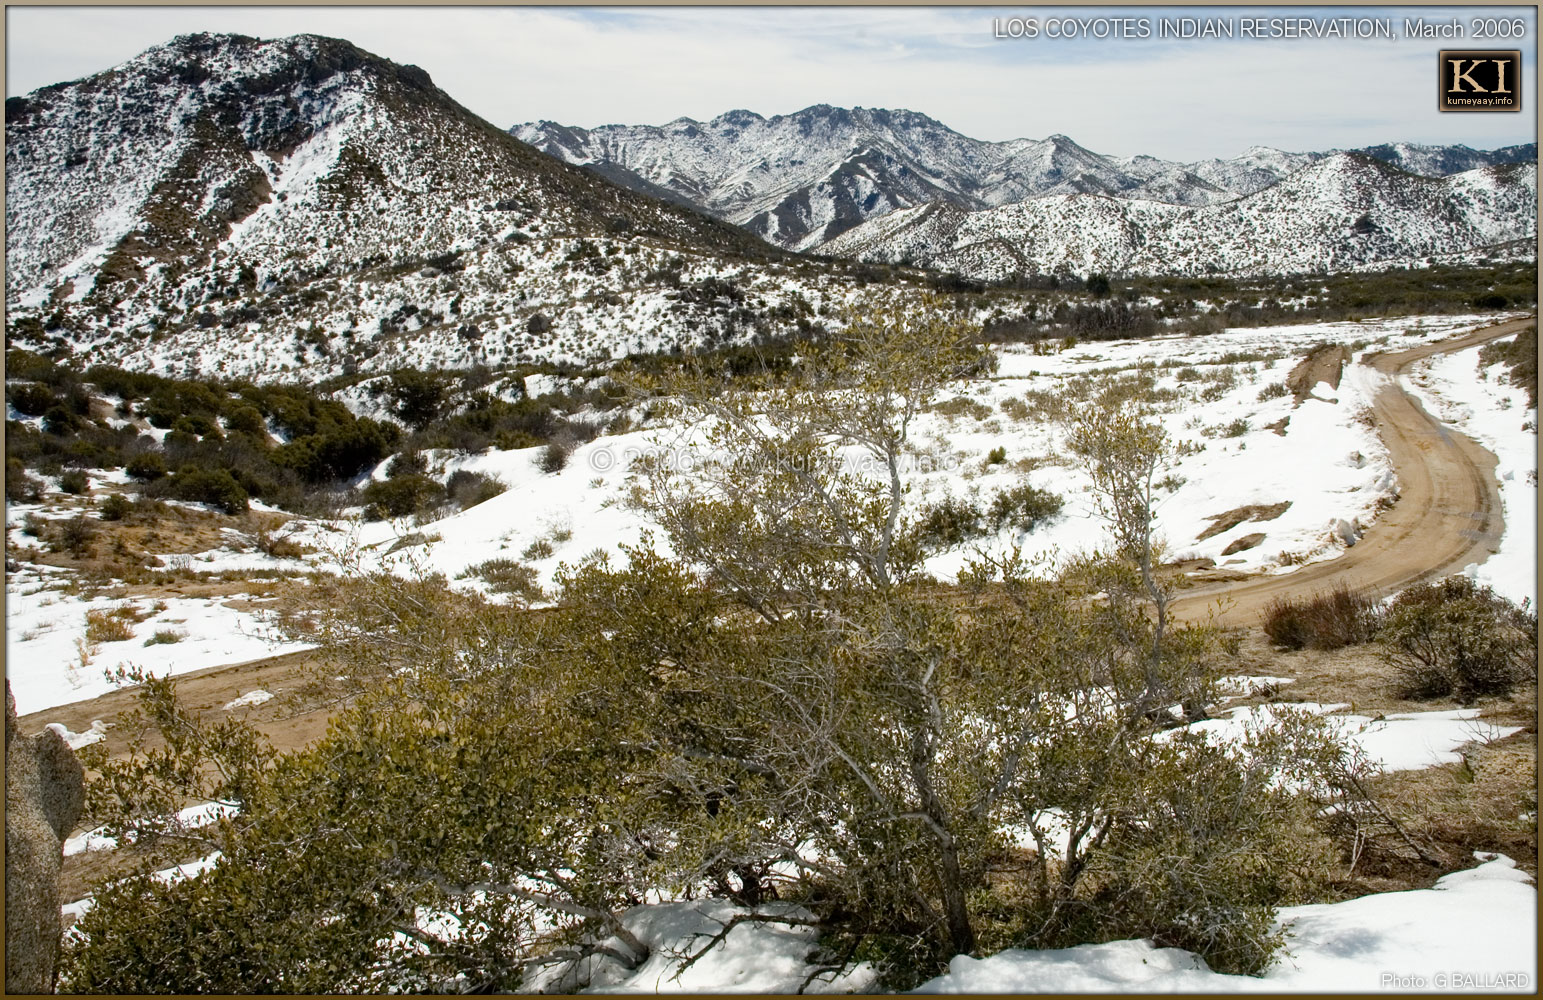 CAHUILLA INDIAN RESERVATION SOCAL HIGH RESOLUTION PICTURES...